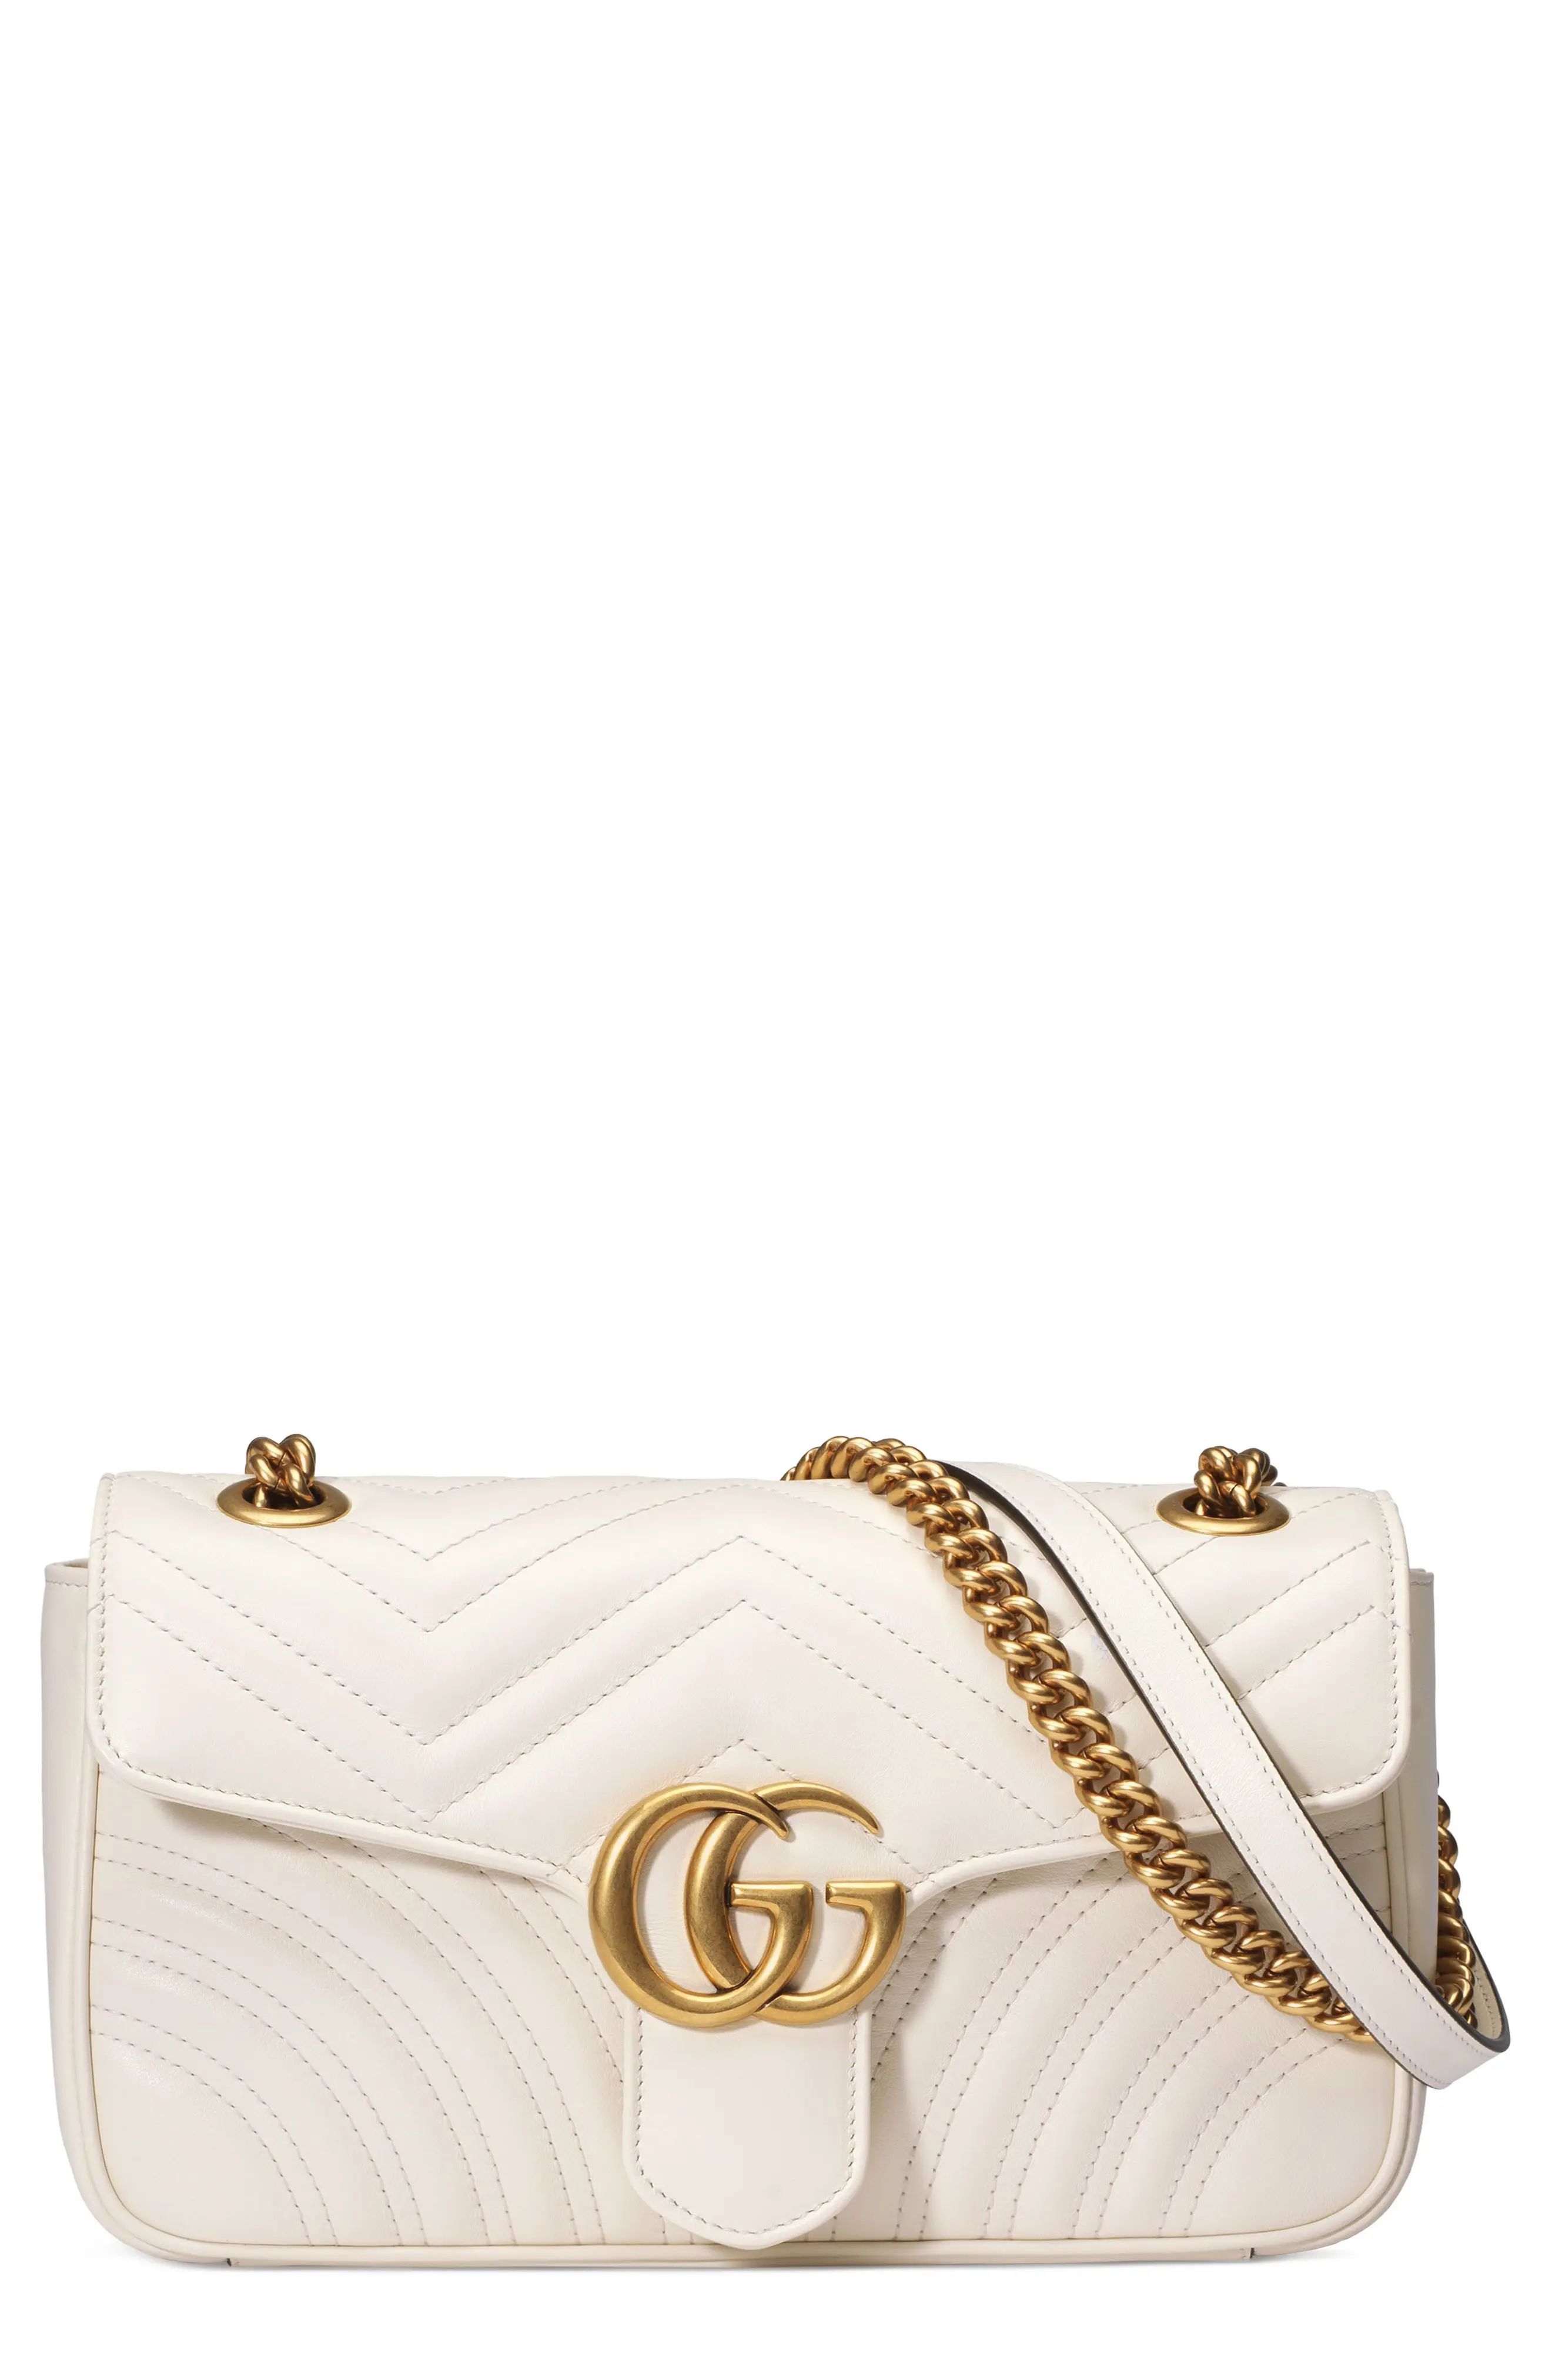 Gucci Small Gg Marmont 2.0 Matelasse Leather Shoulder Bag - White | Nordstrom